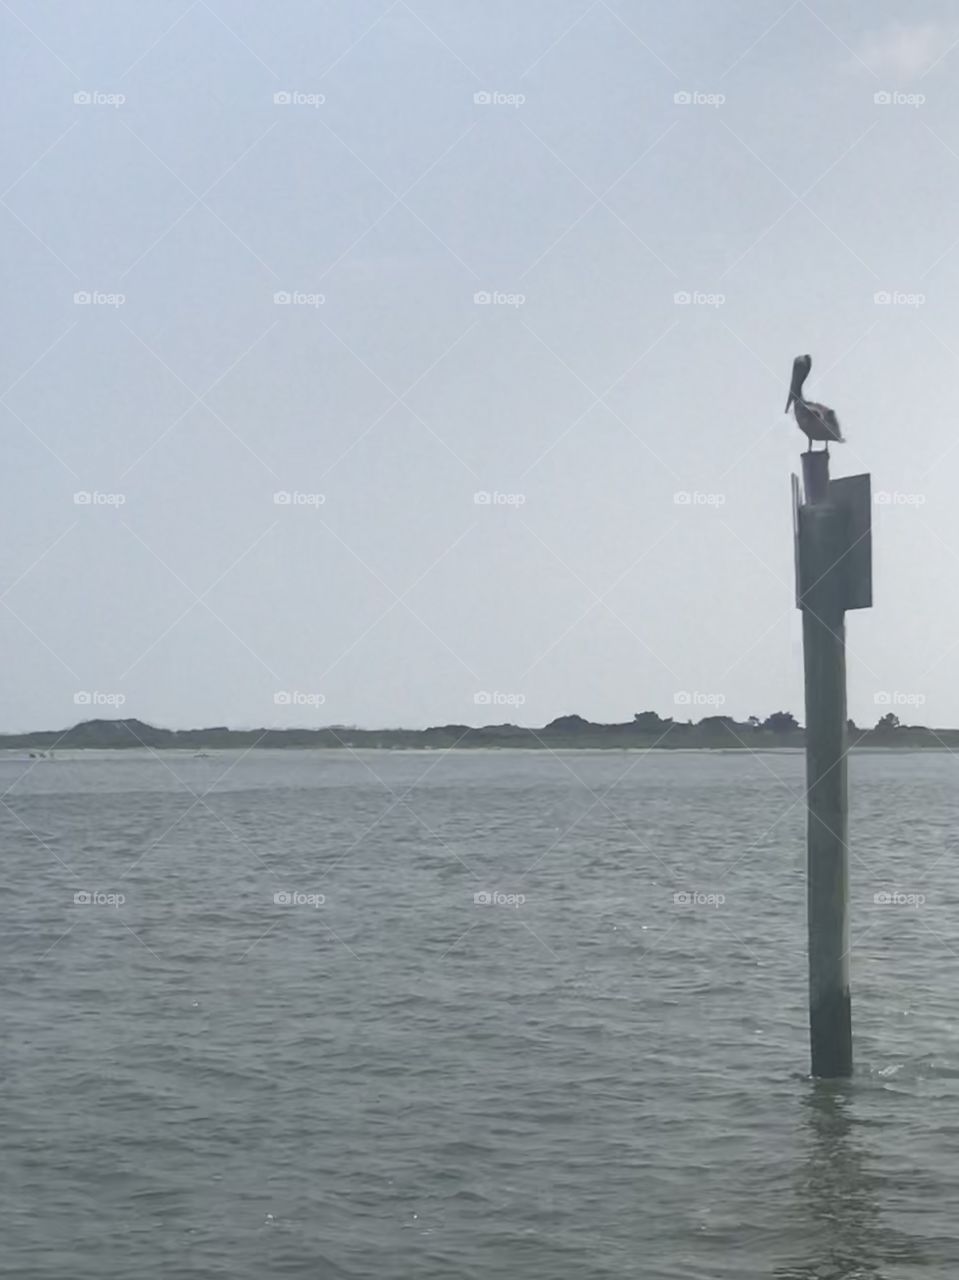 A lone pelican sits on a post in the middle of the ocean. The warm waves of the Carolina oceans envelop the bird’s perch.